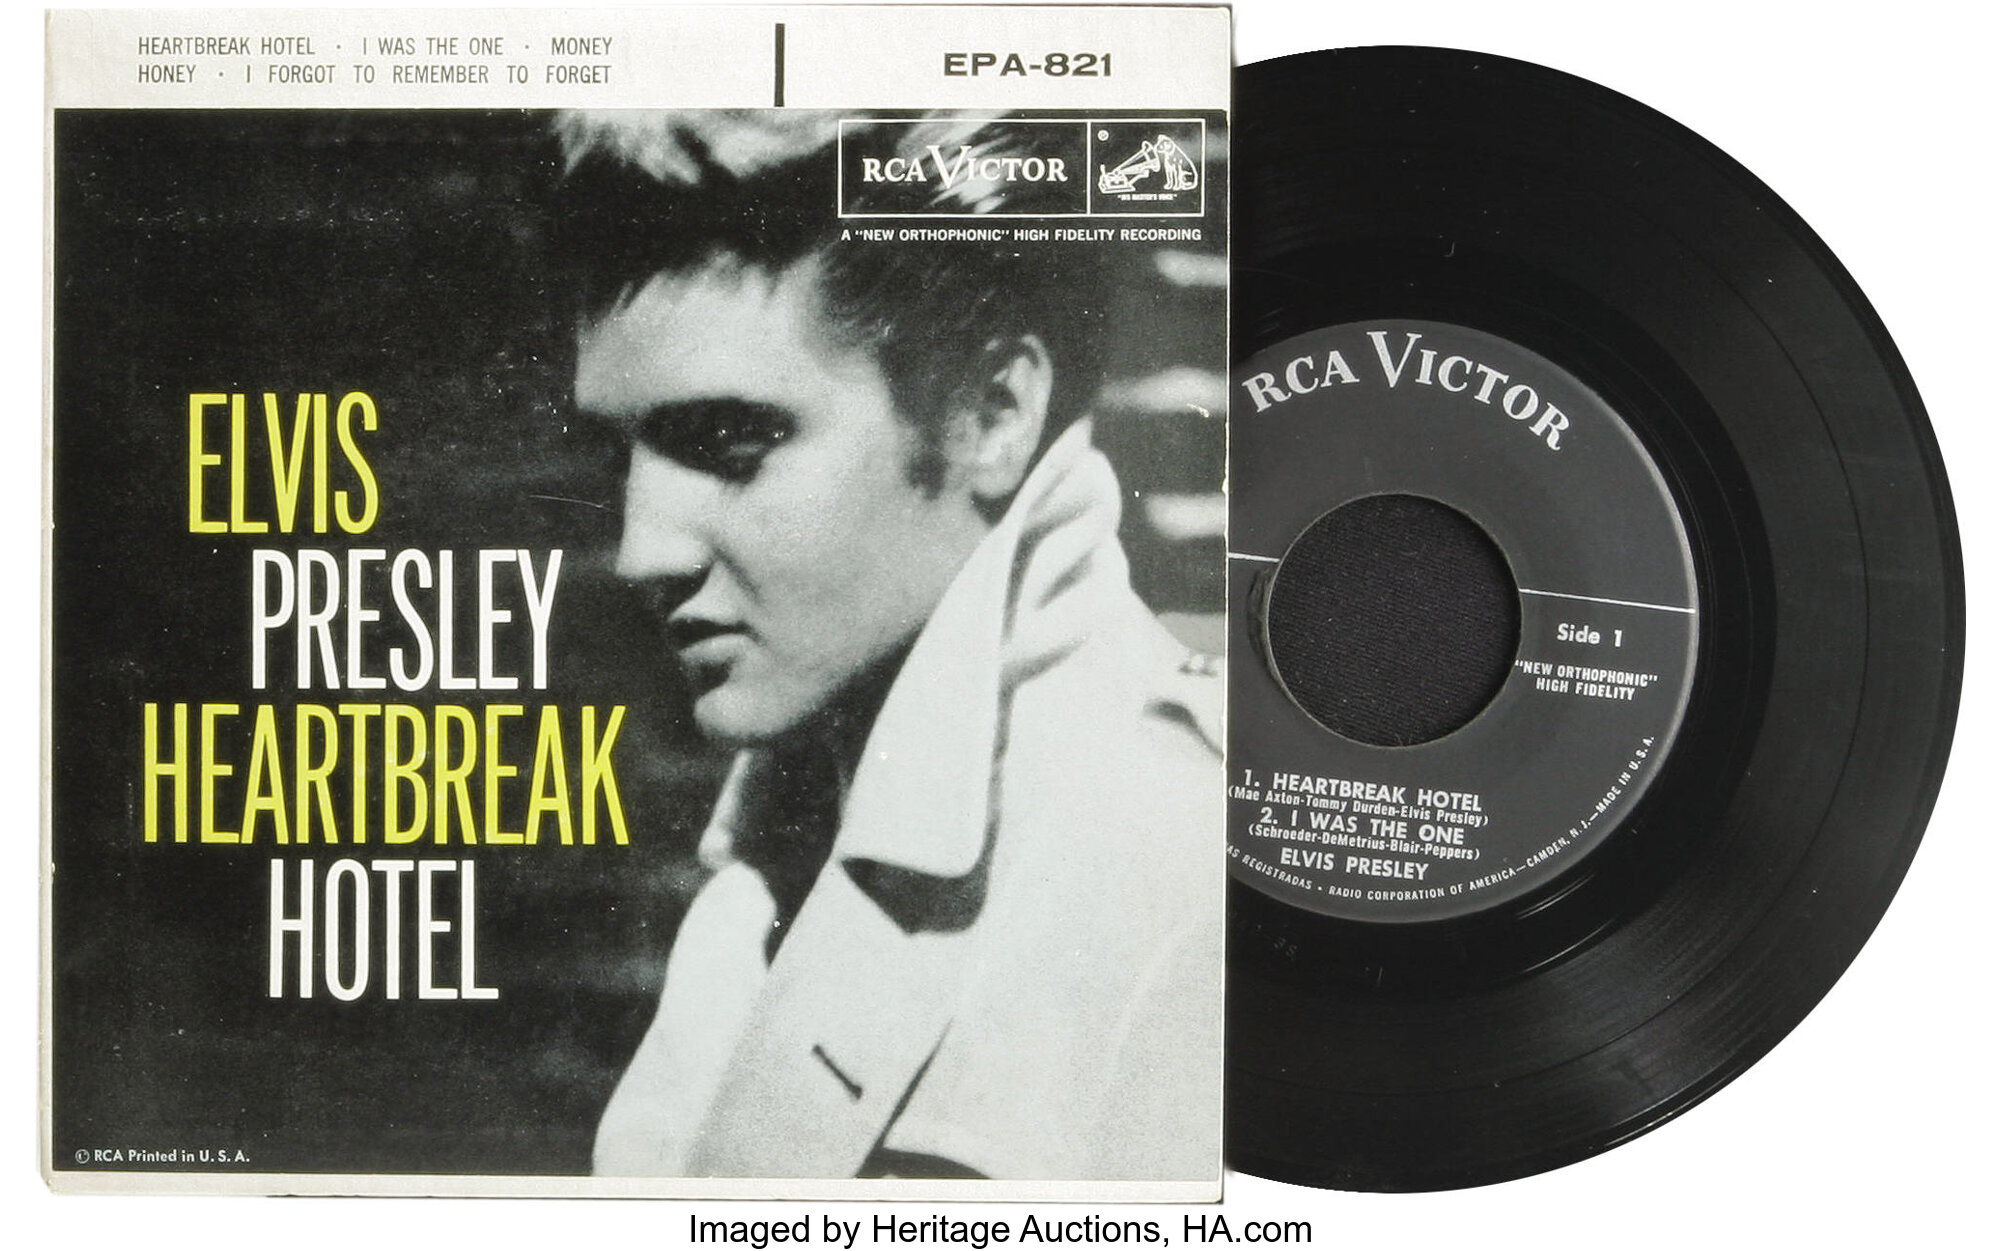 I Forgot to Remember to Forget” … Elvis Presley's First #1 Record